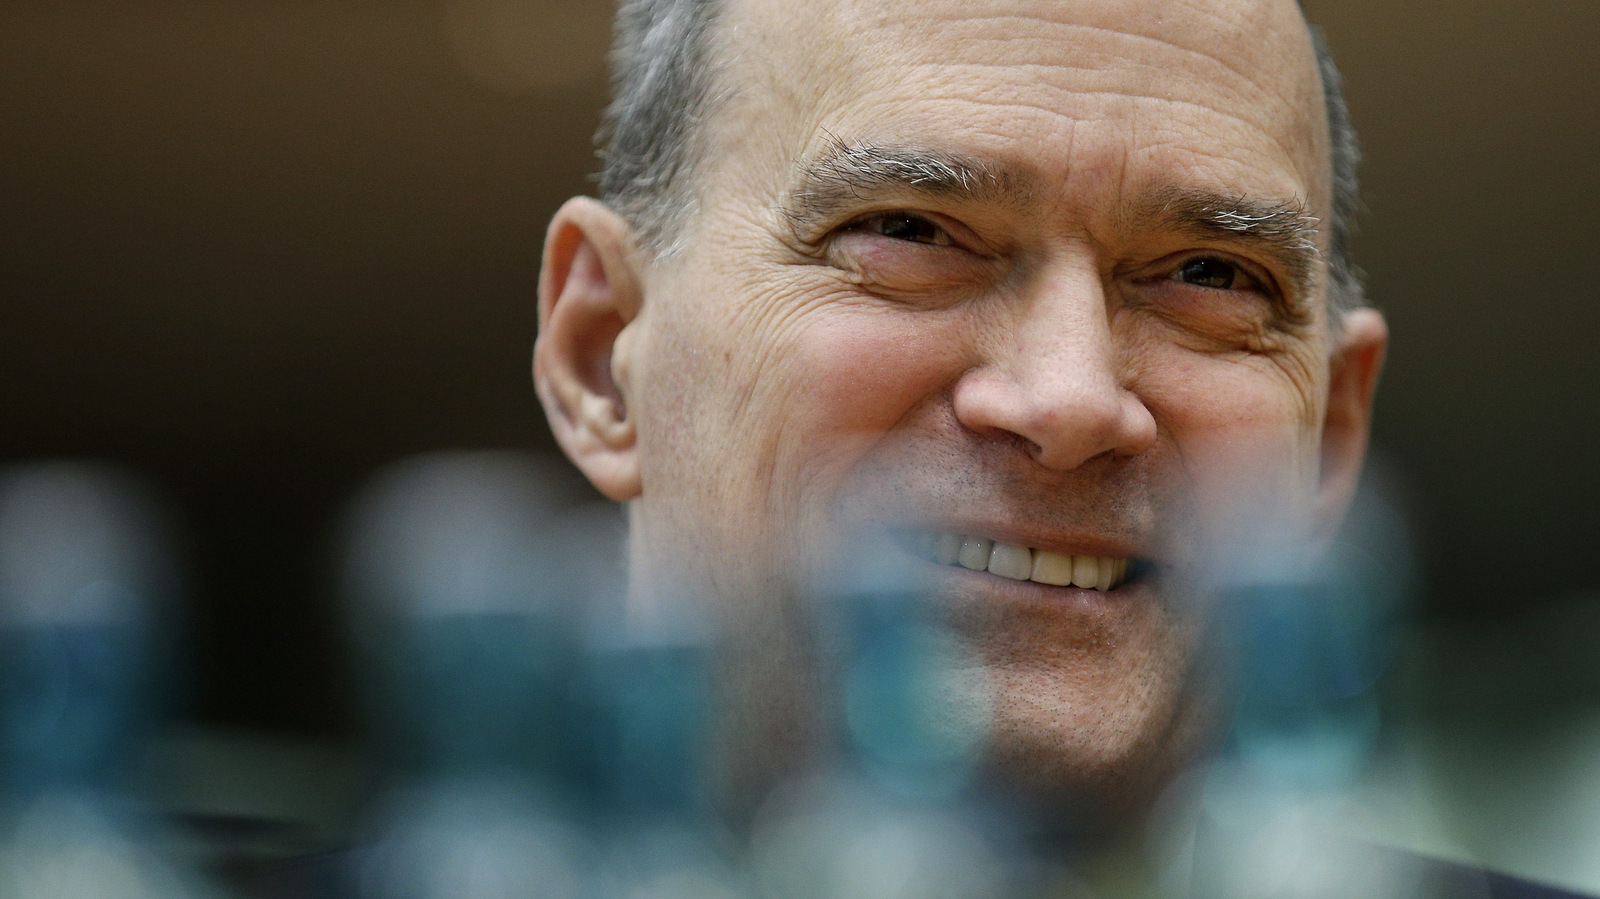 The former US National Security Agency, NSA, employee William Binney smiles behind water bottles as he waits for his questioning by the German parliamentary NSA investigation committee in Berlin, Germany, July 3, 2014. (AP/Michael Sohn)